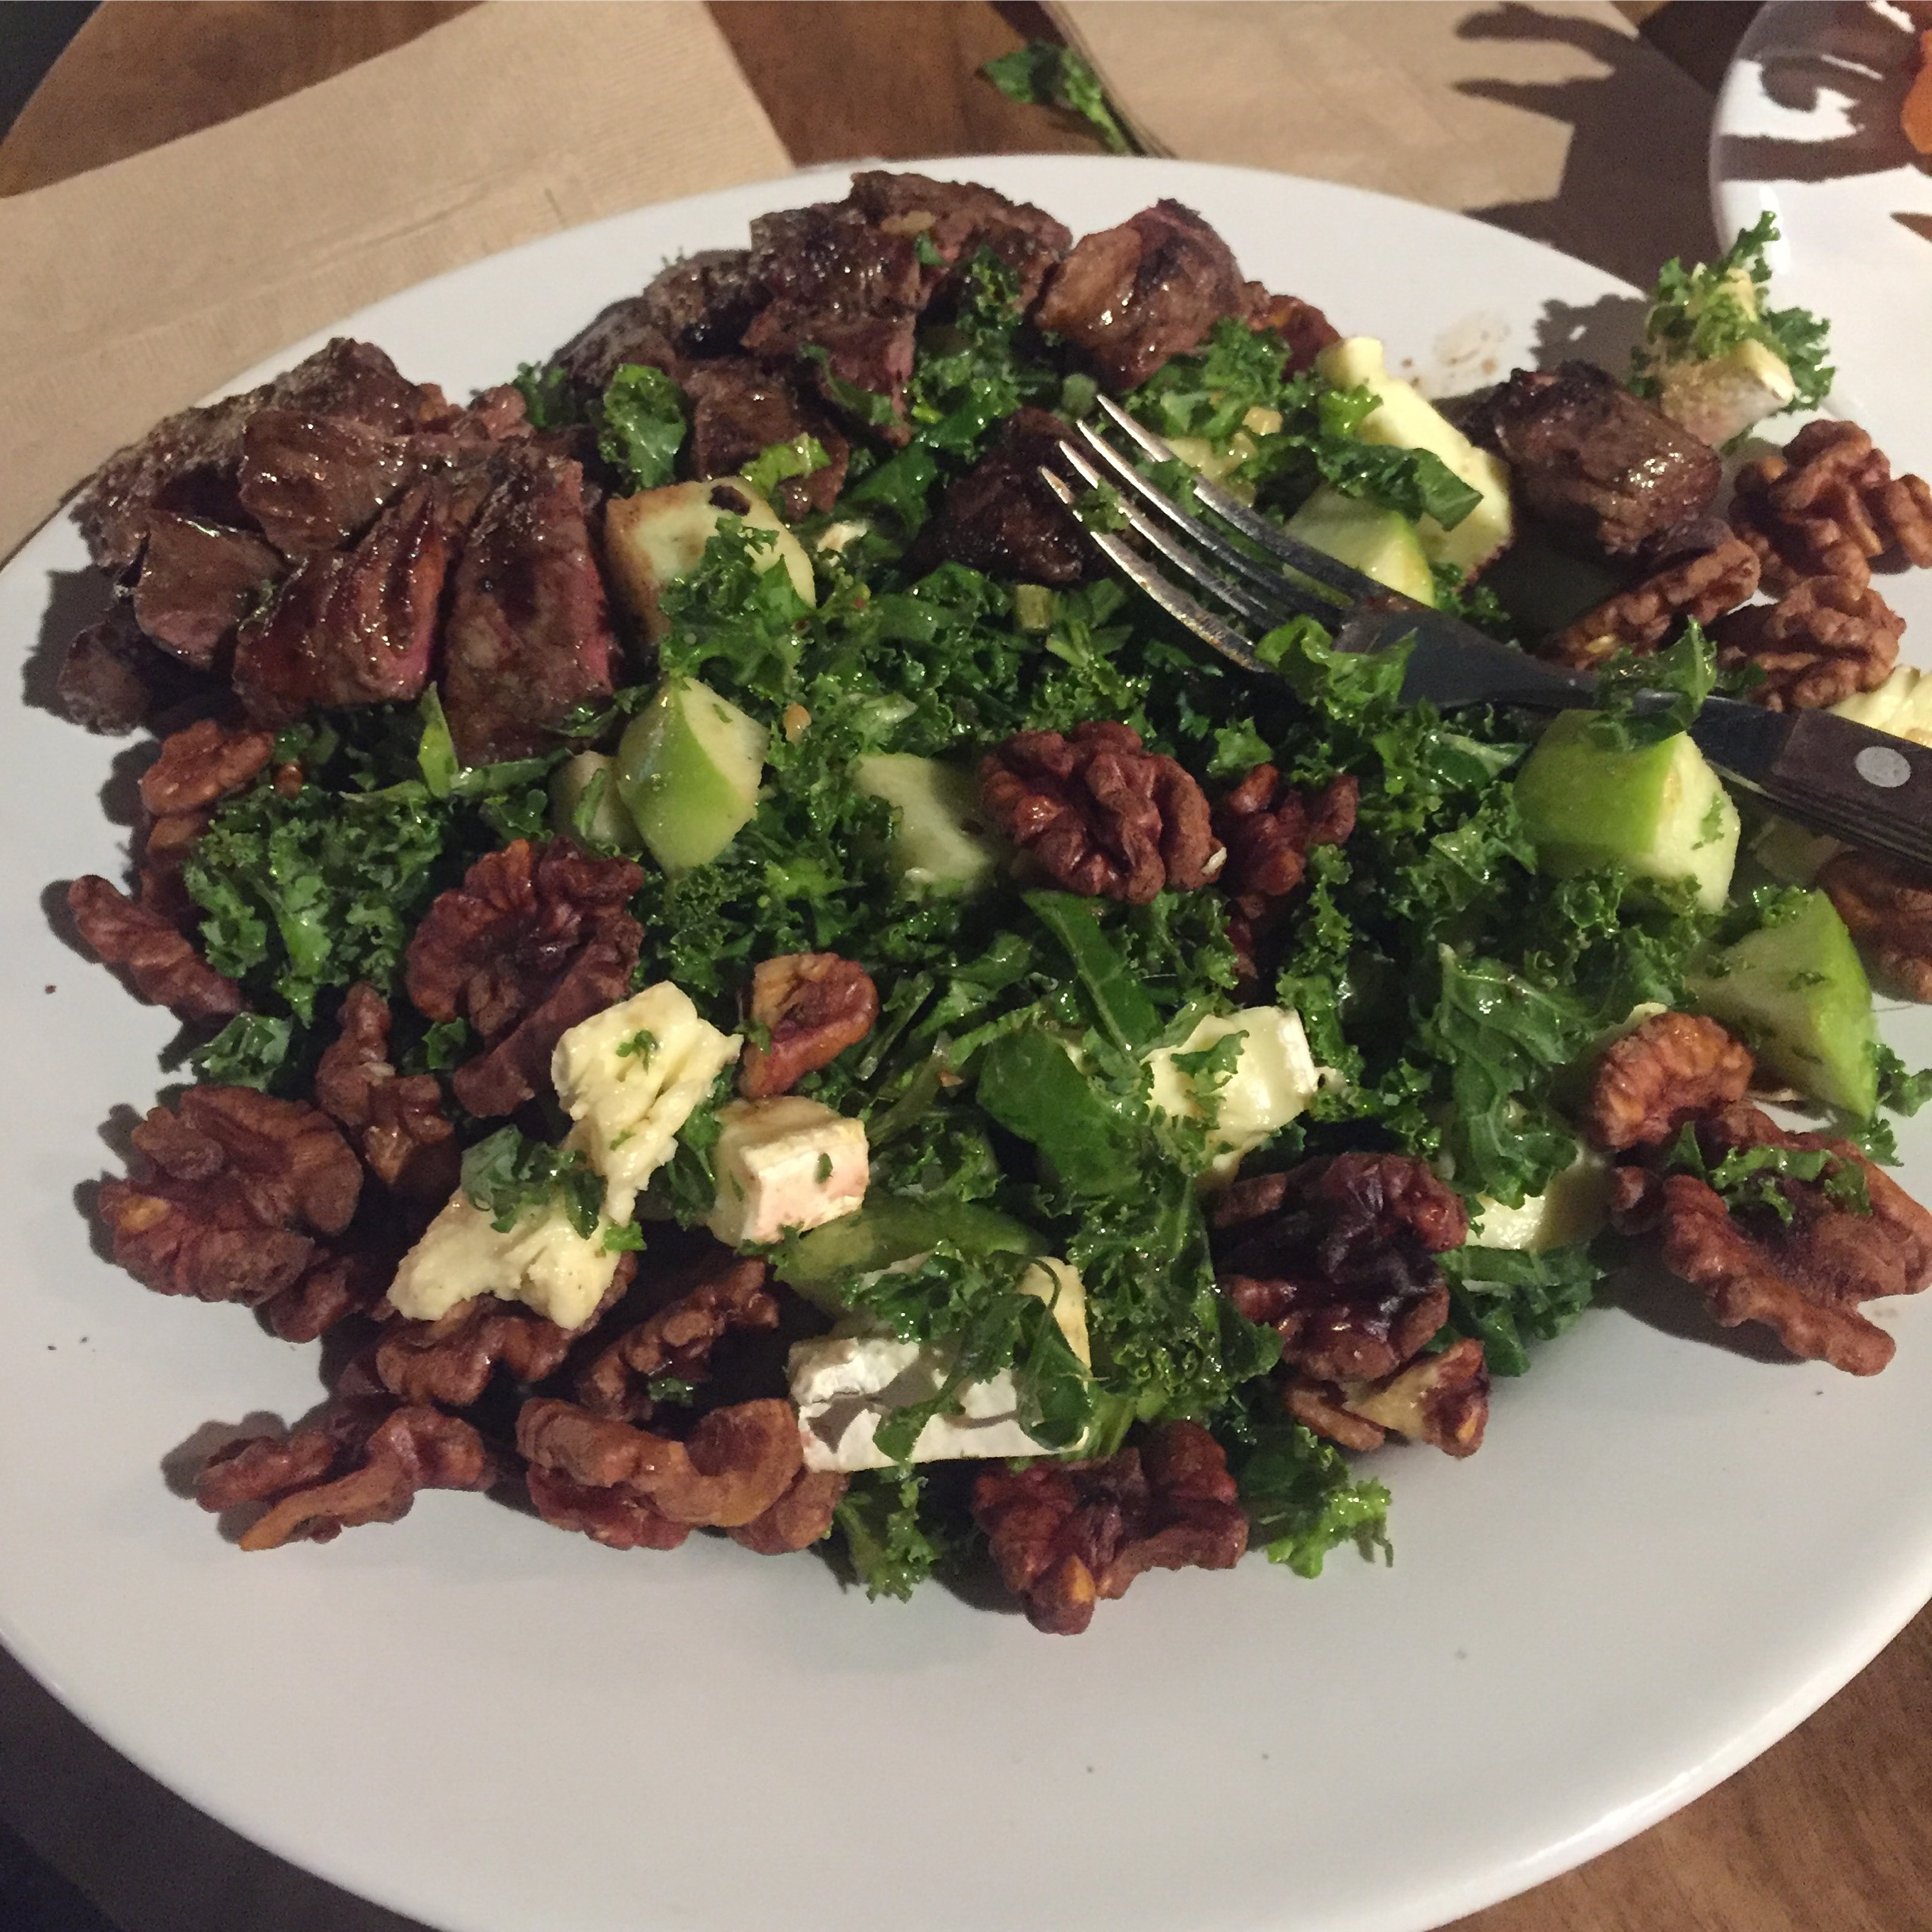 Bulletproof Kale Salad with Grass-fed beef